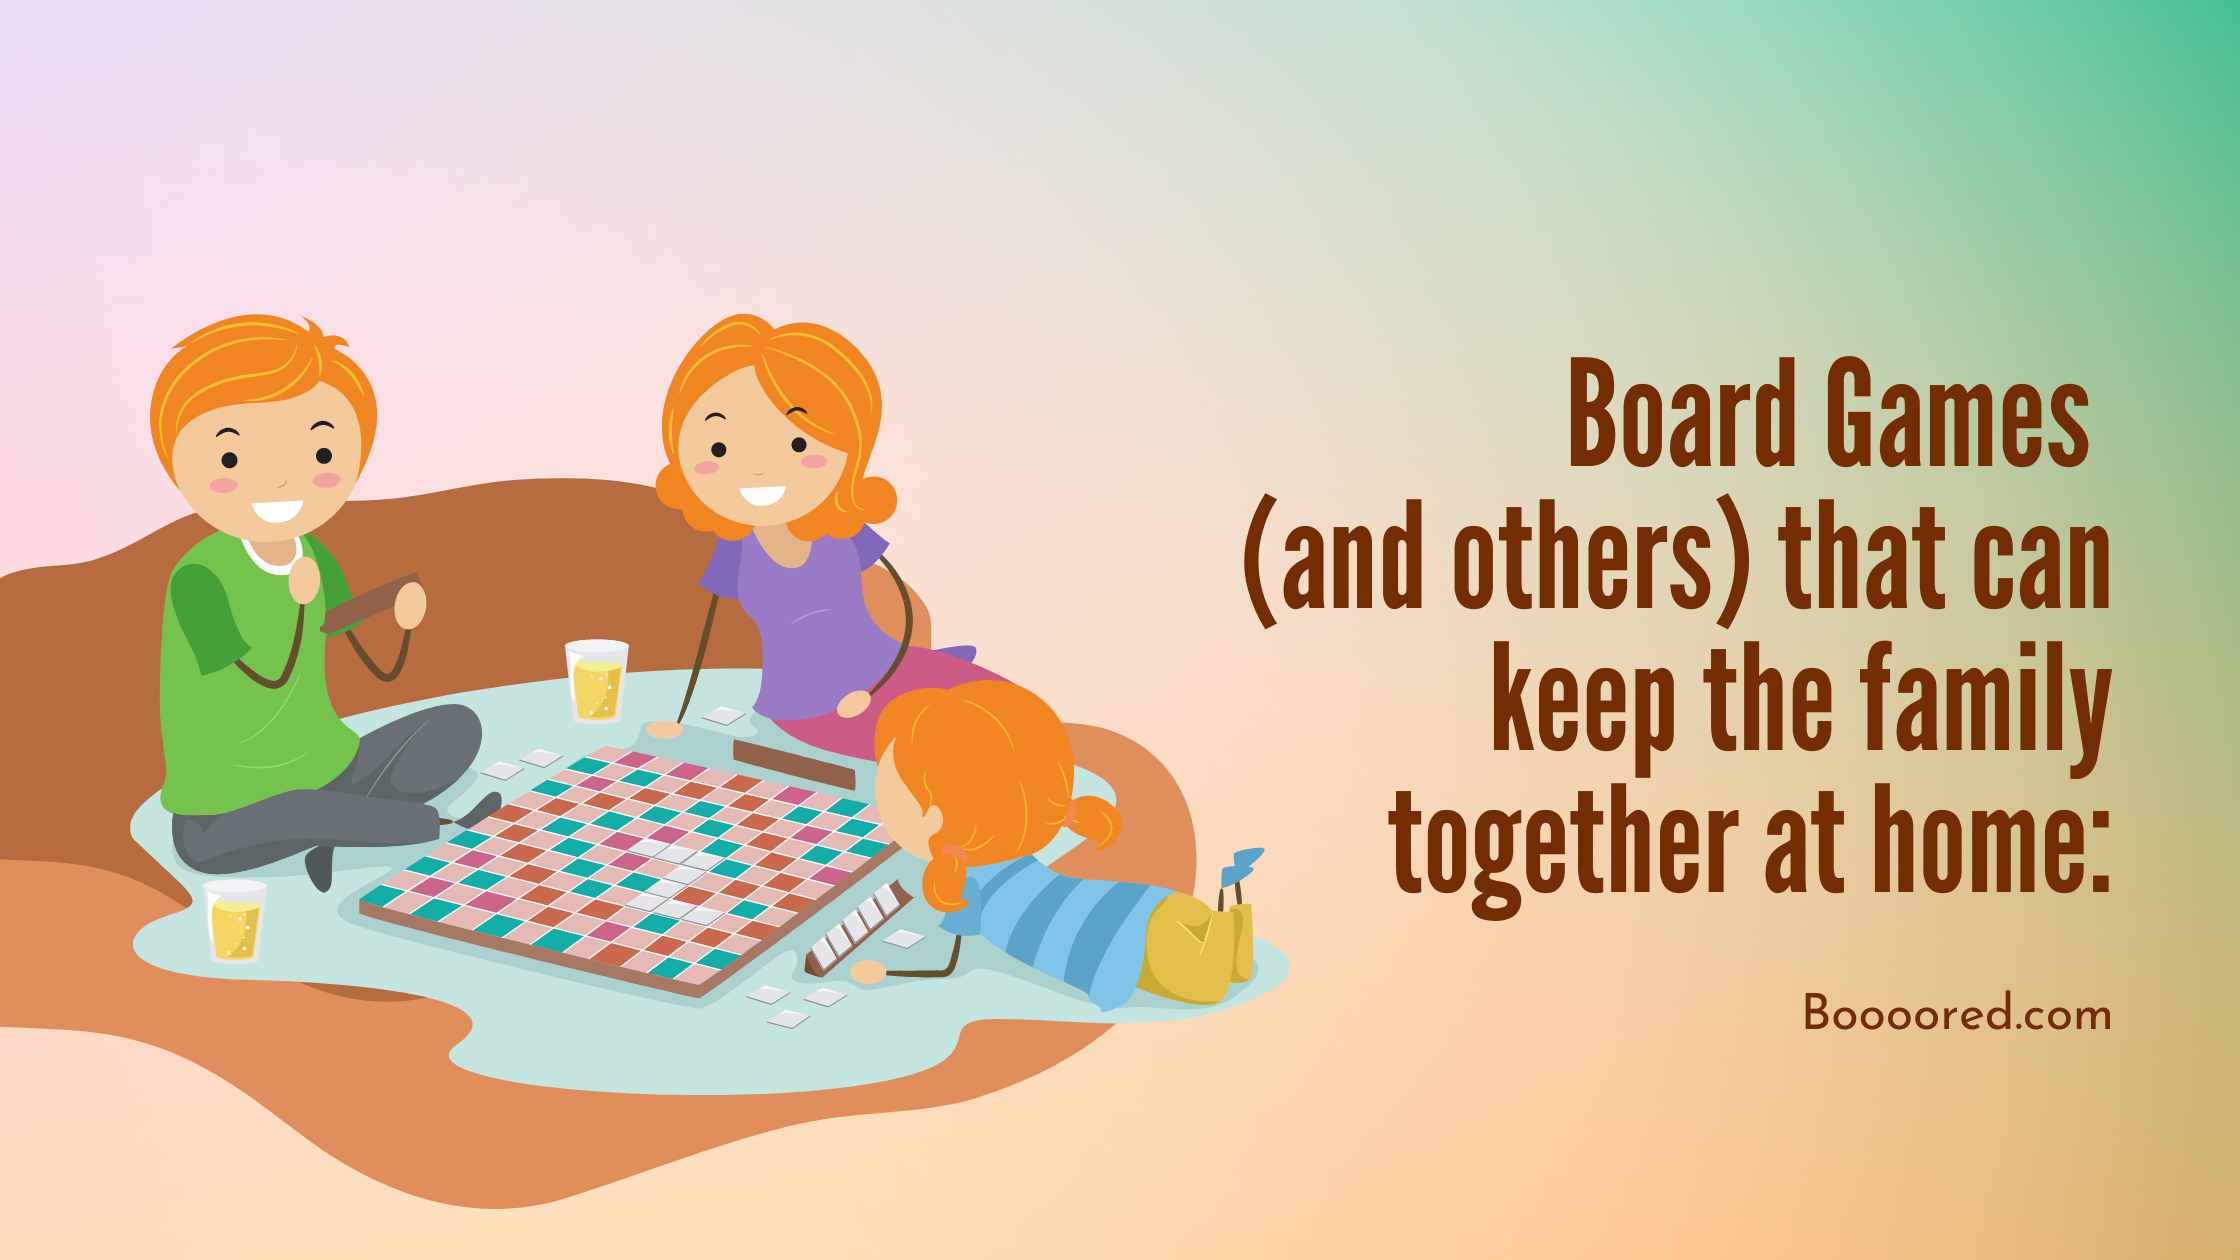 Board Games (and others) that can keep the family together at home: